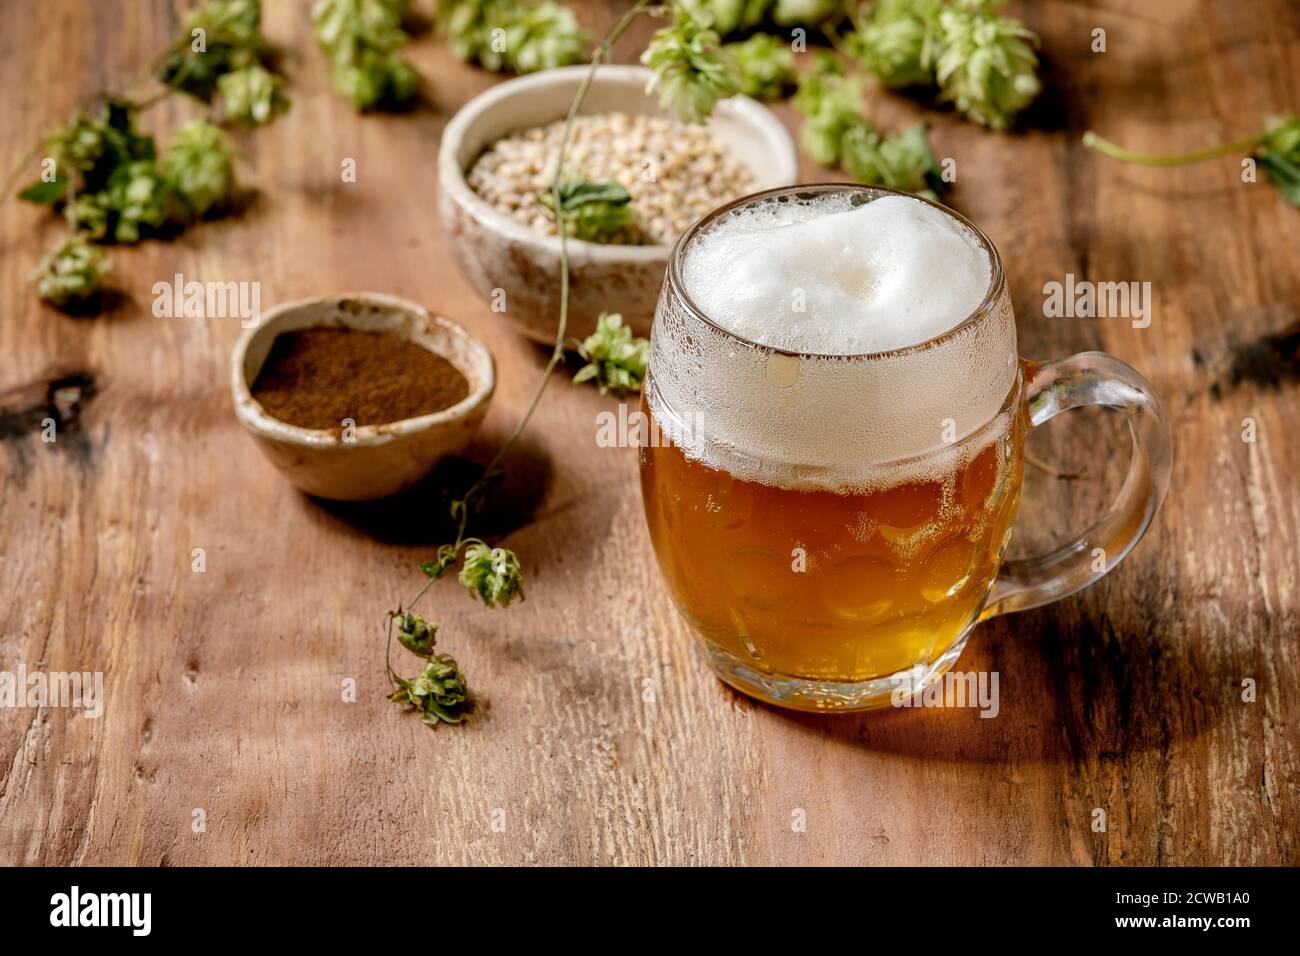 Beer Tower With Hop Malt And Wheat On Wood Background Stock Photo